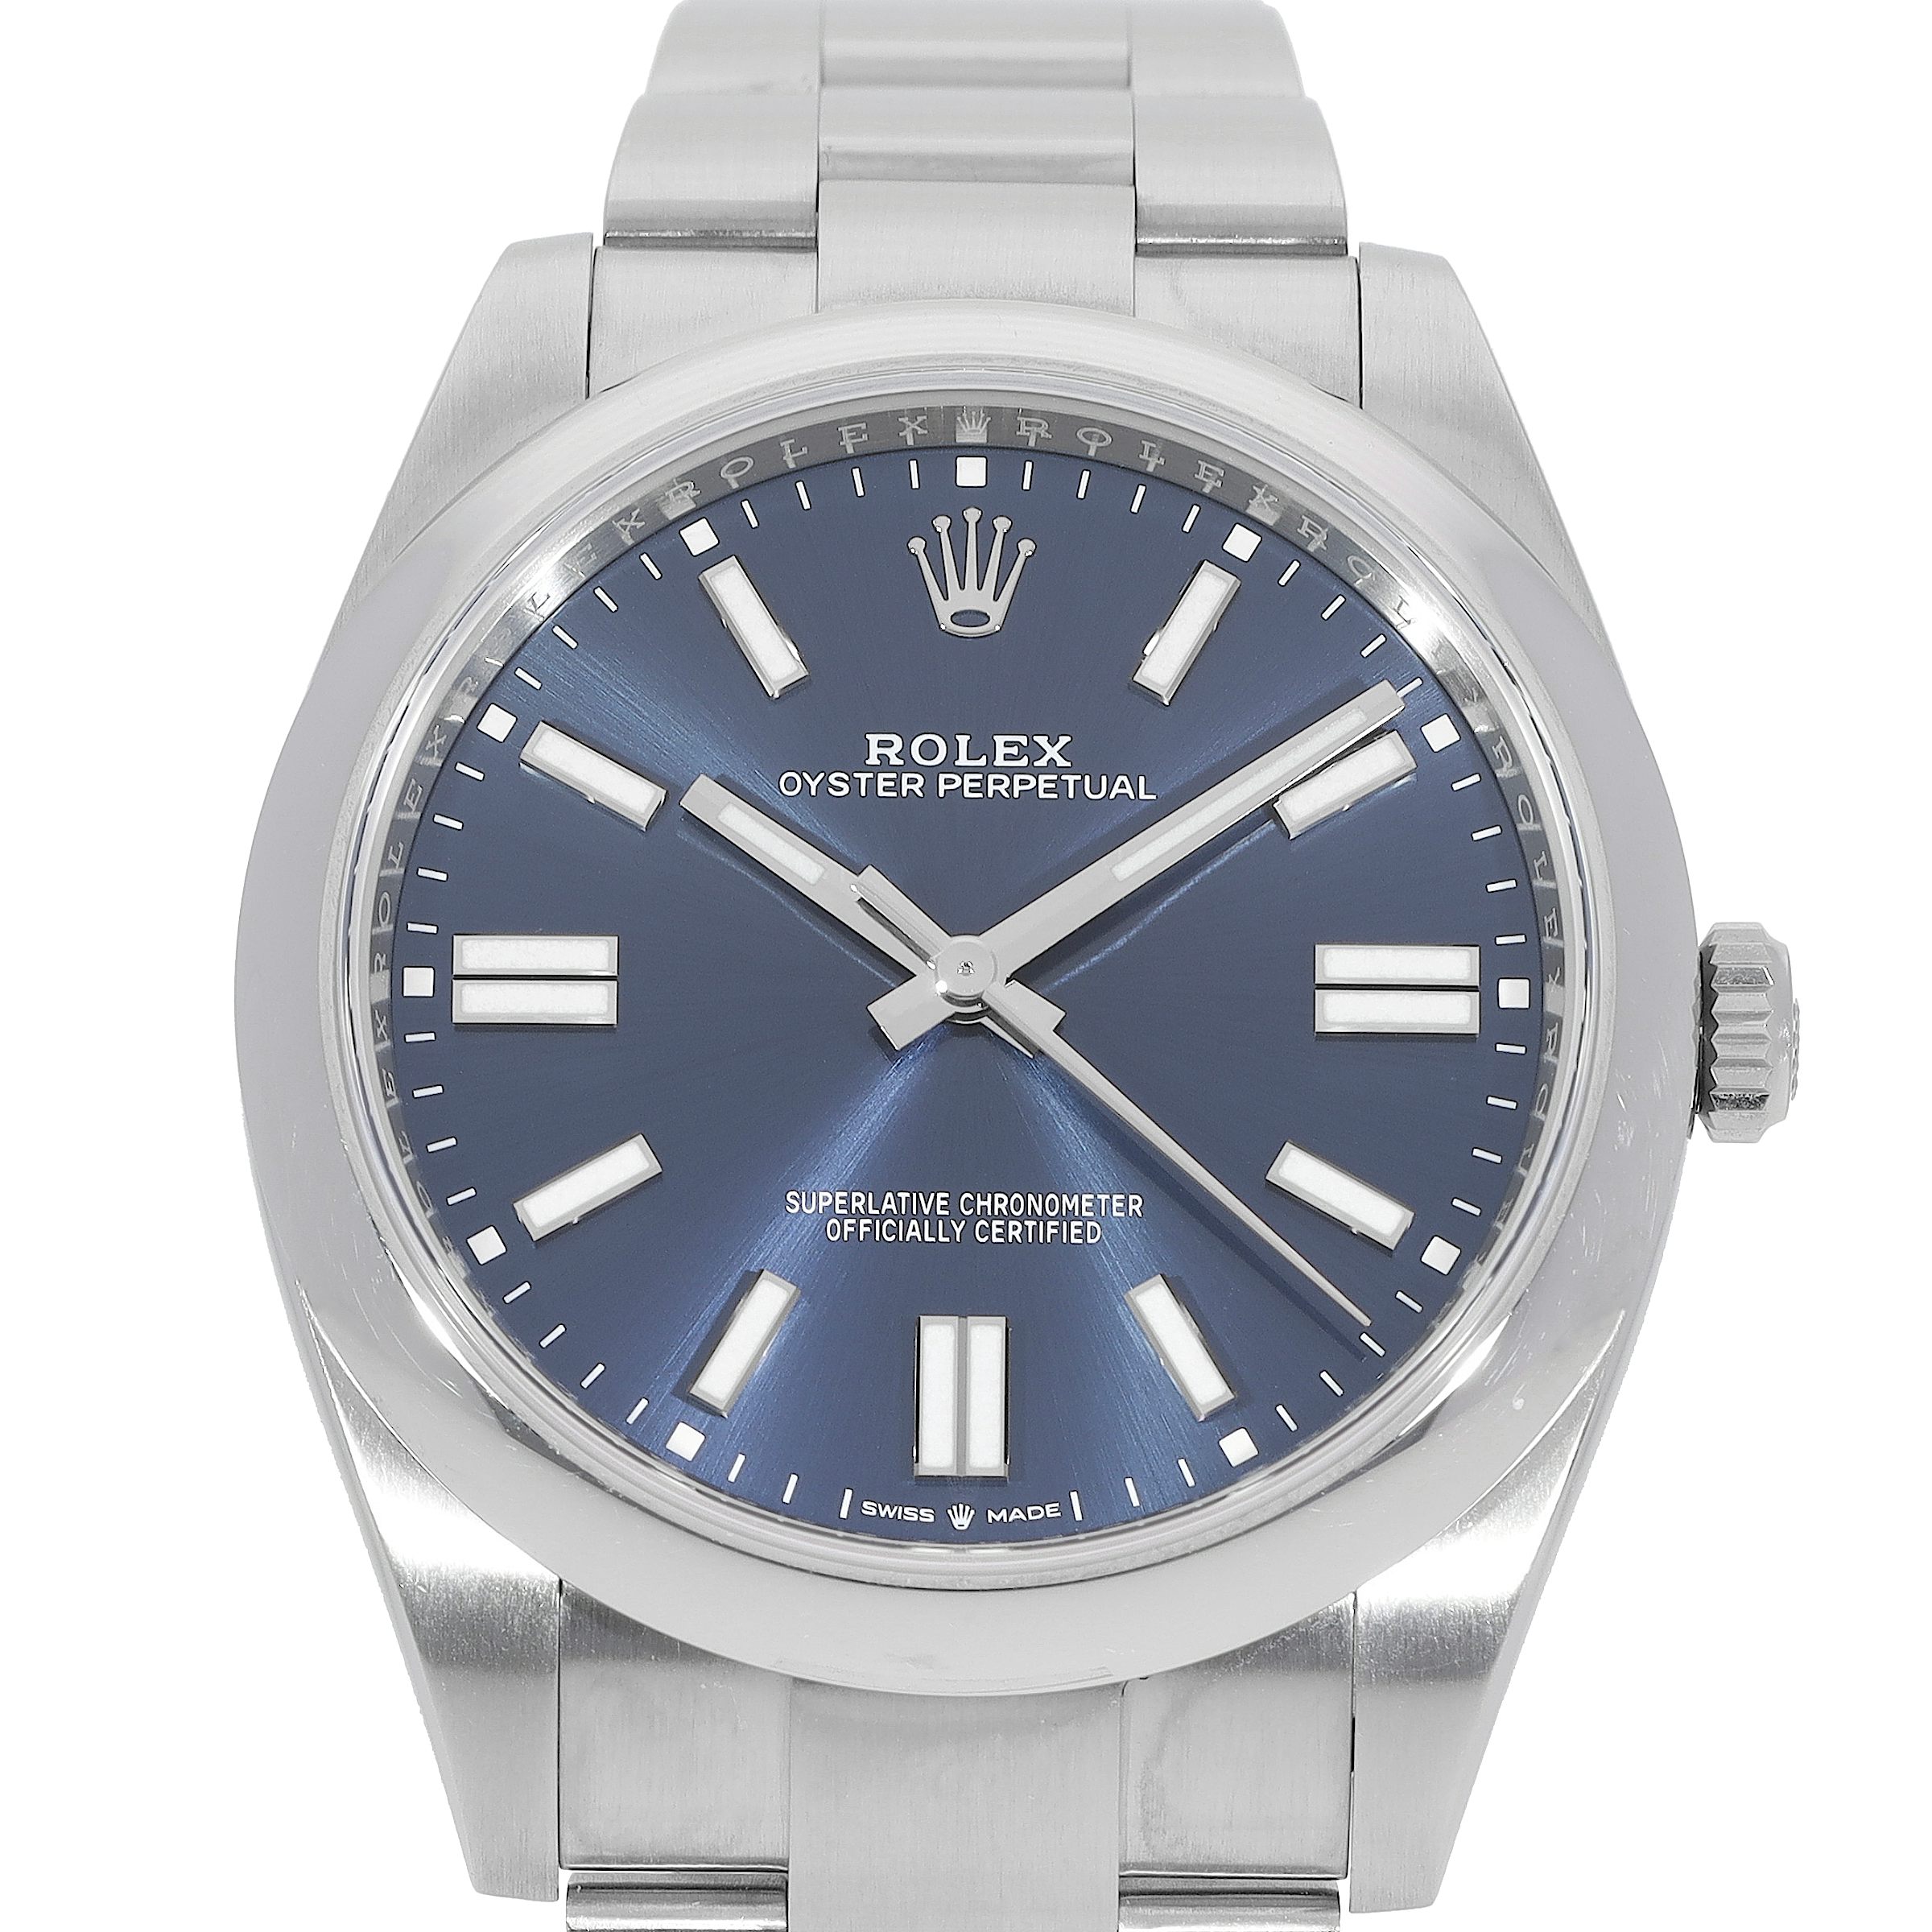 Rolex Oyster Perpetual 124300 in Stainless Steel | CHRONEXT